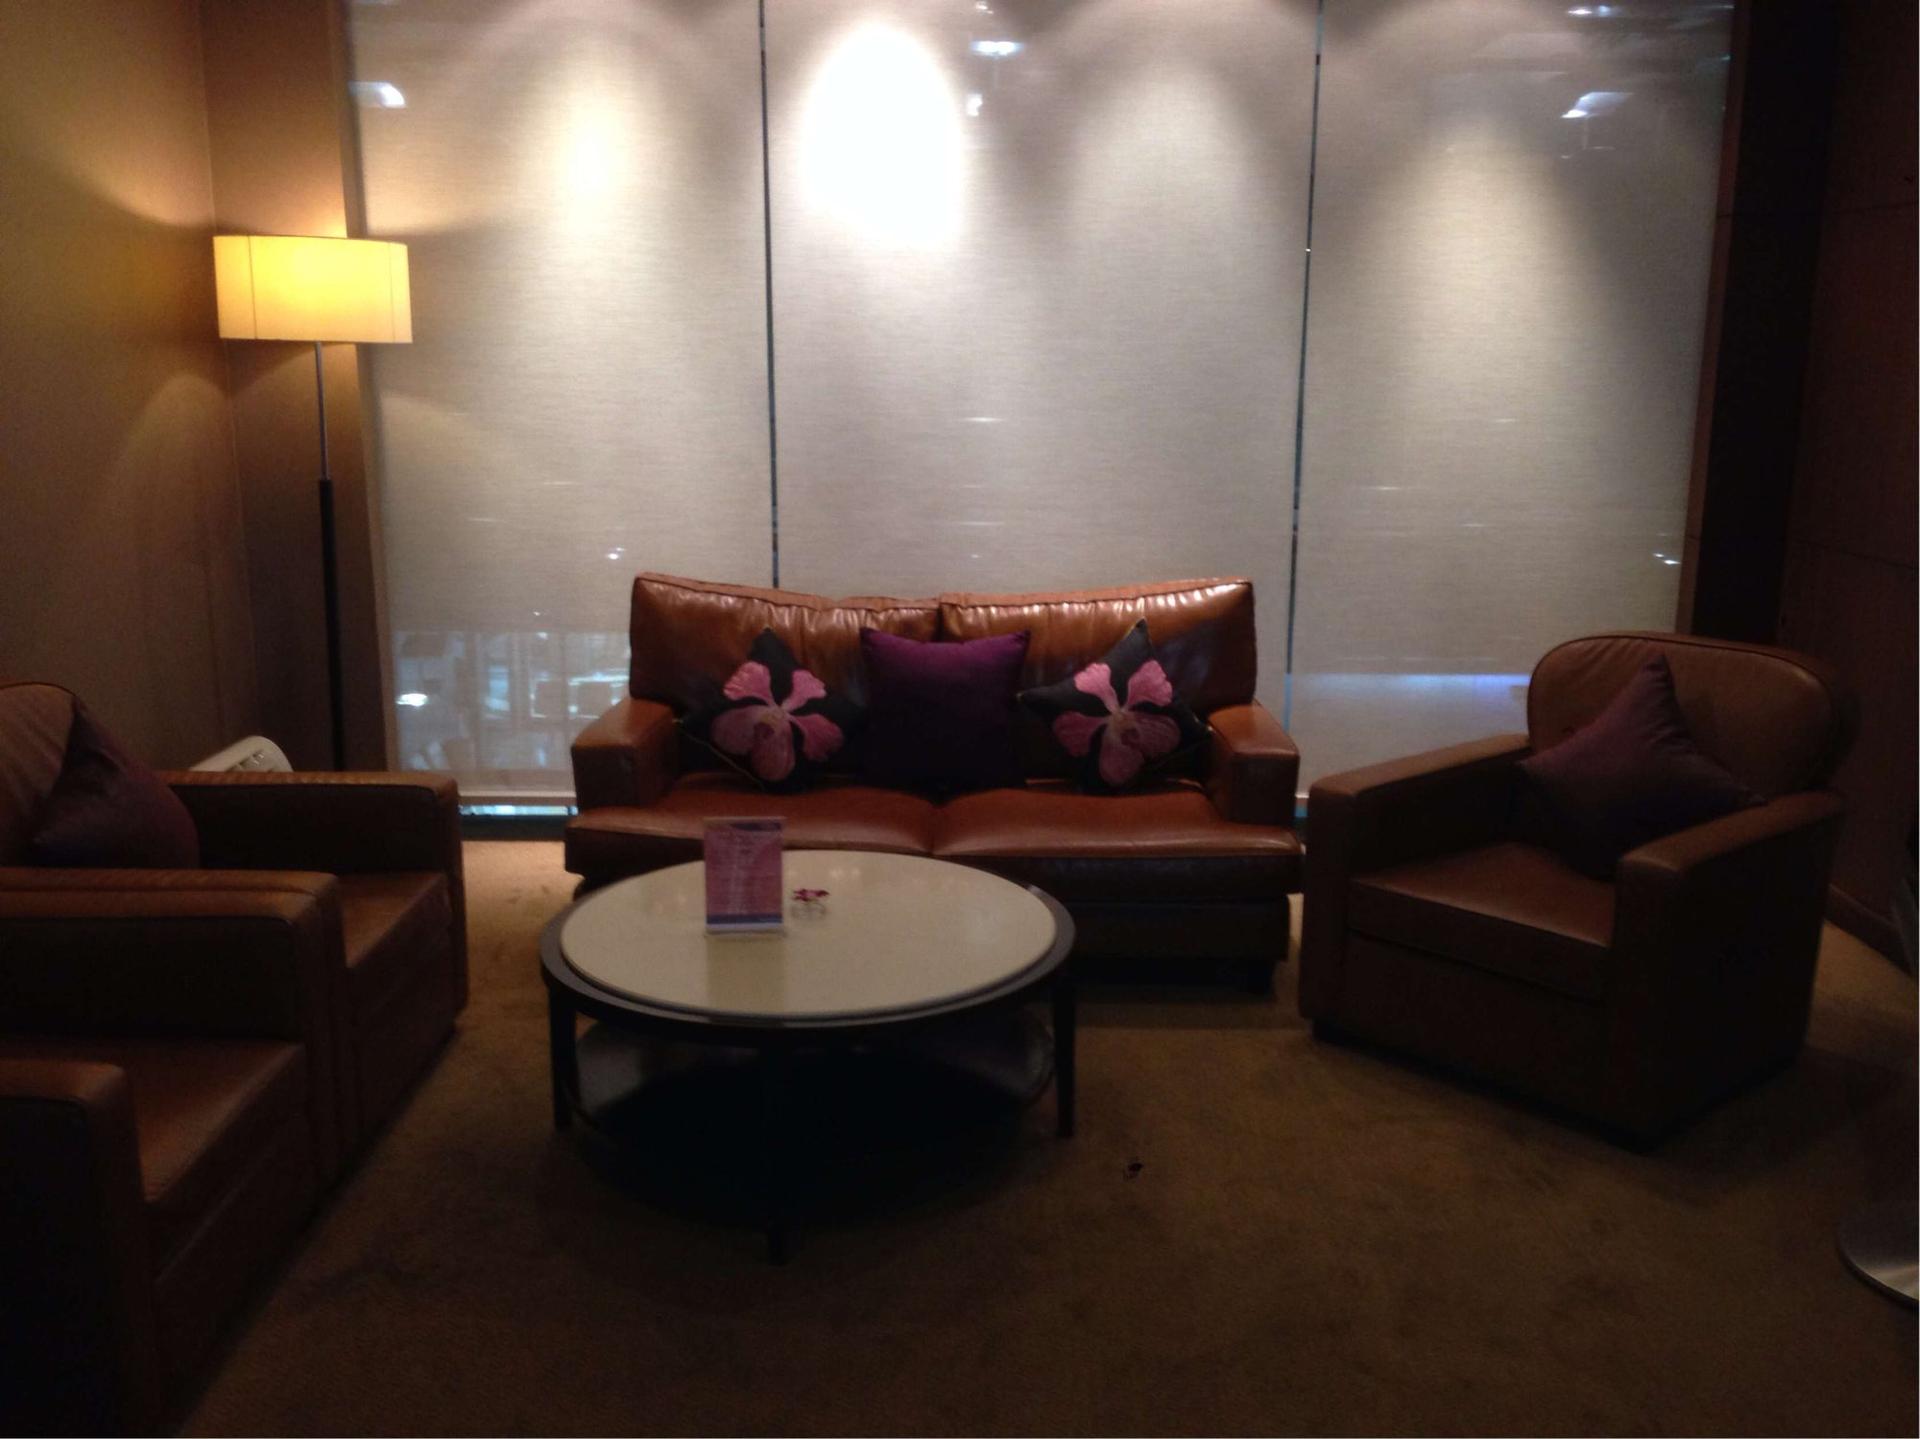 Thai Airways Royal First Class Lounge image 6 of 44